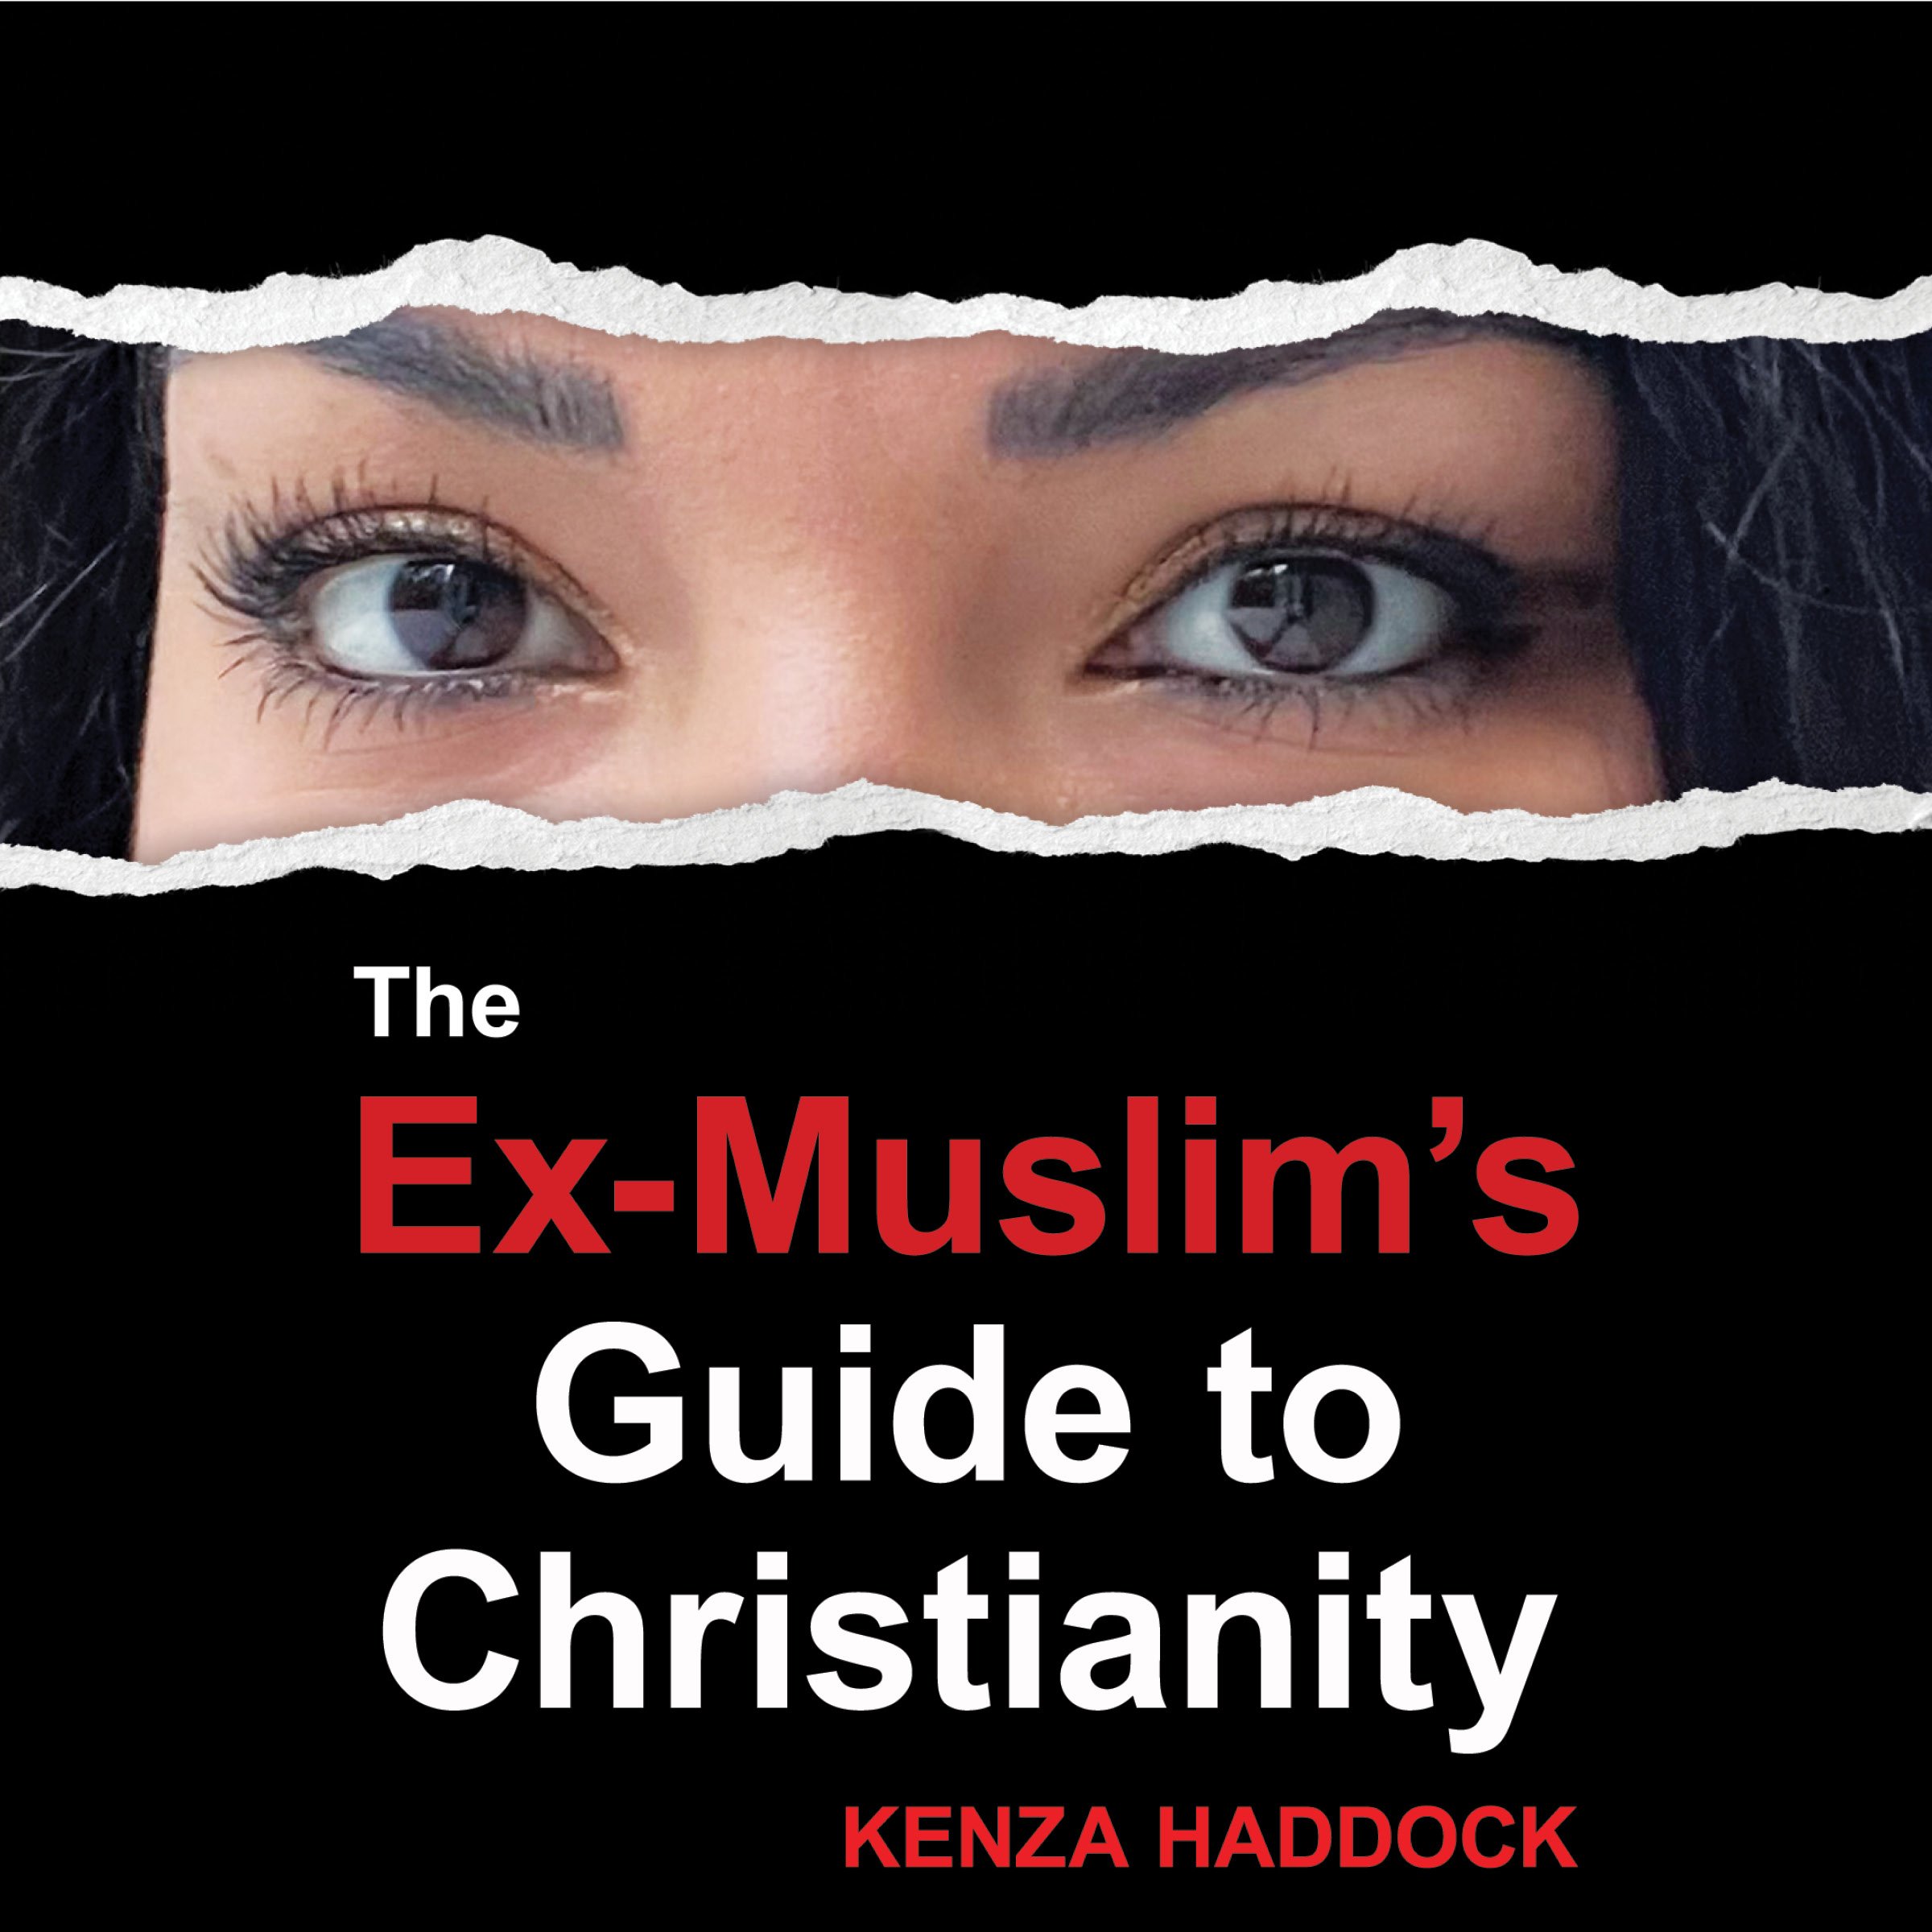 Ex-Muslim's Guide to Christianity